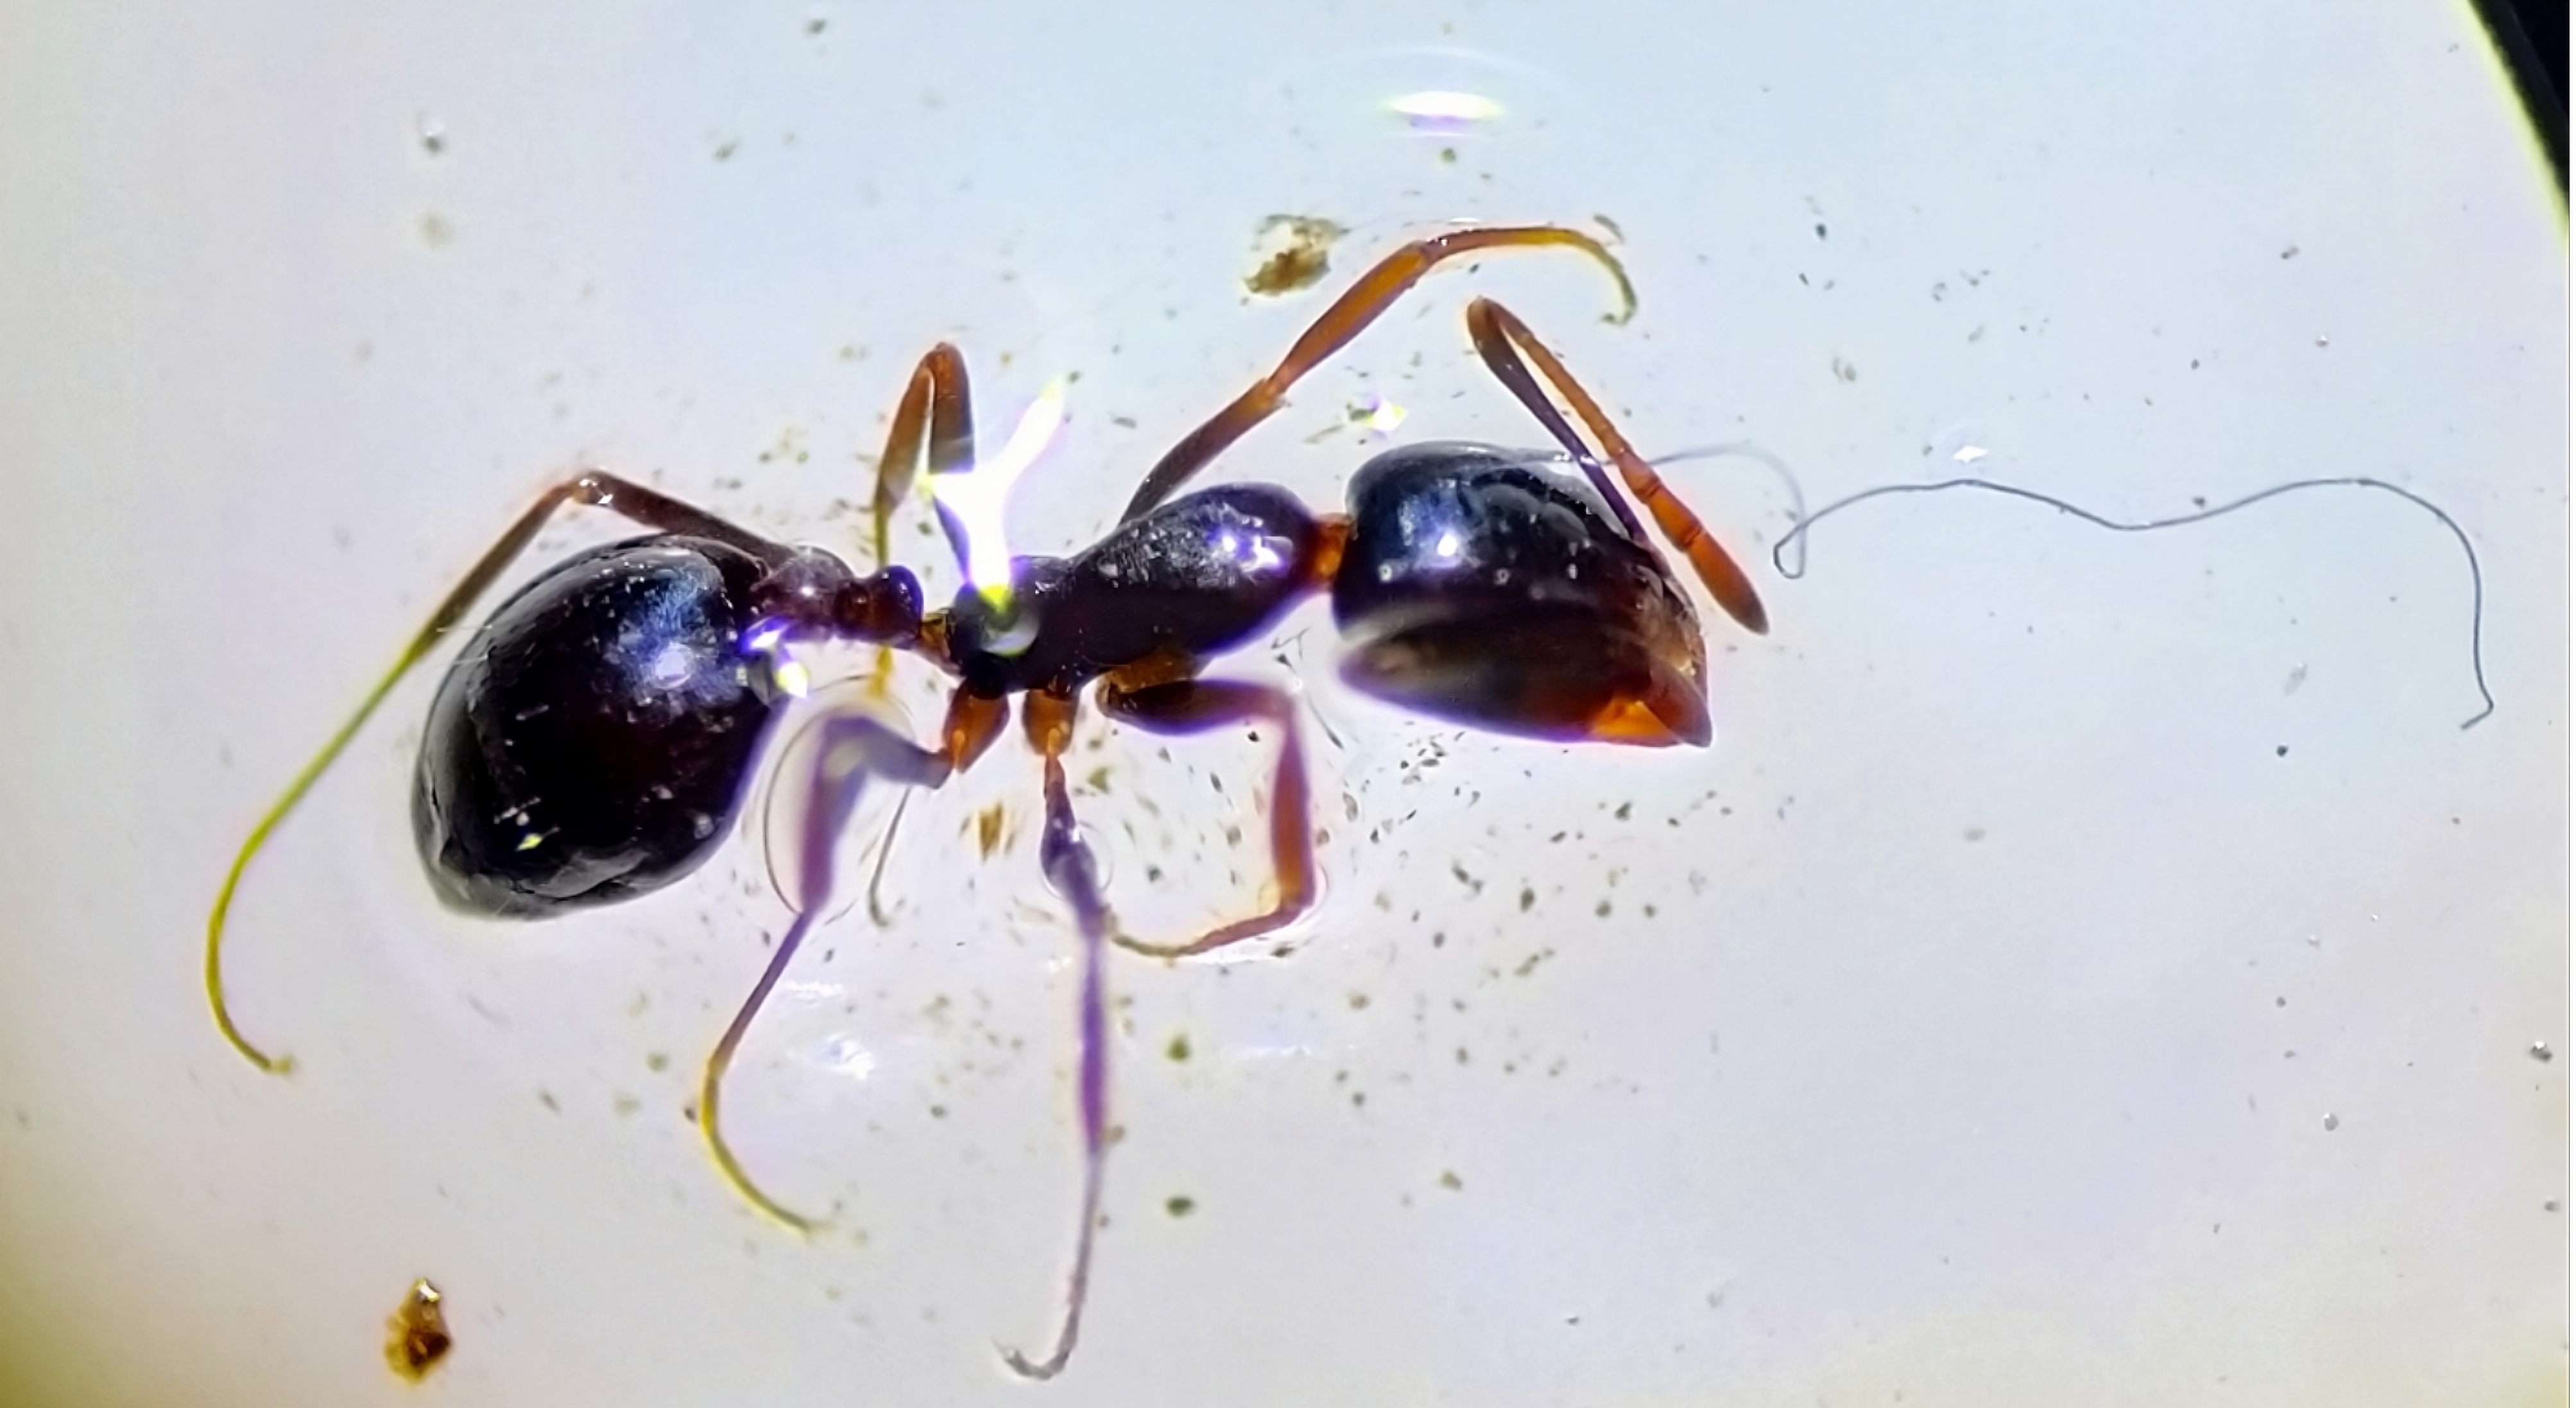 Microscope image of an ant struggling with plastic fibres.